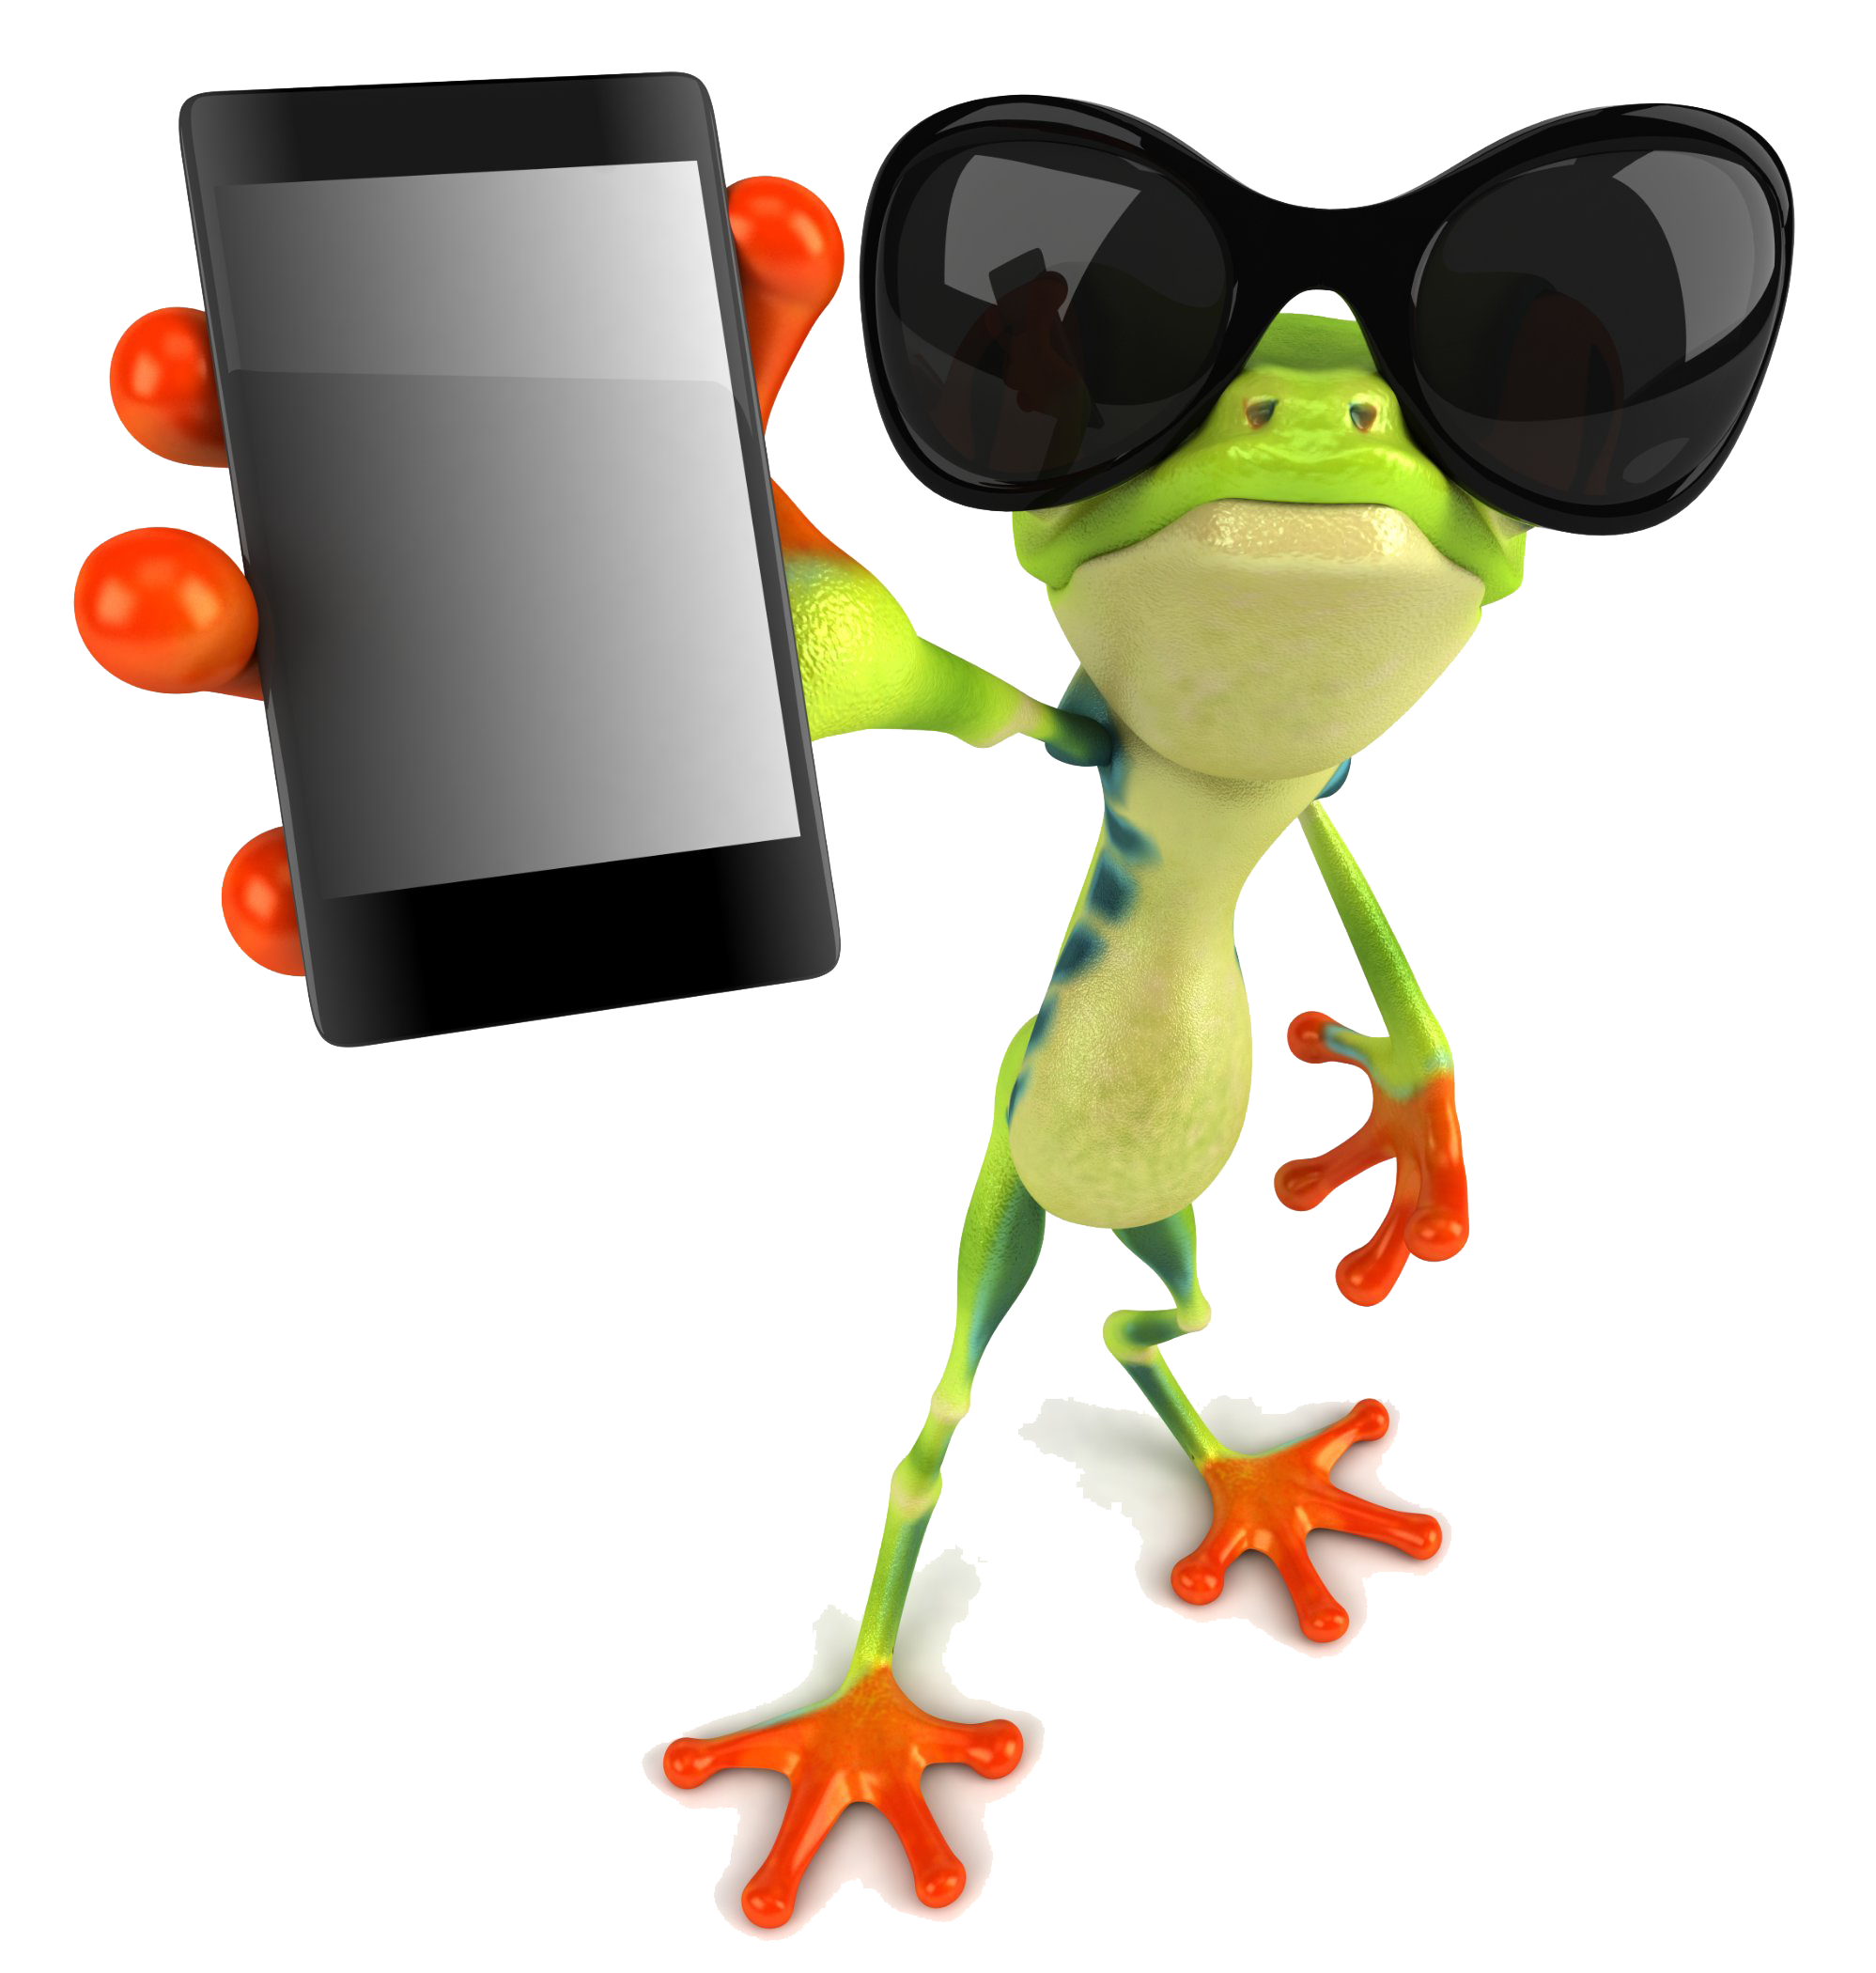 Cartoon frog with sunglasses holding smartphone